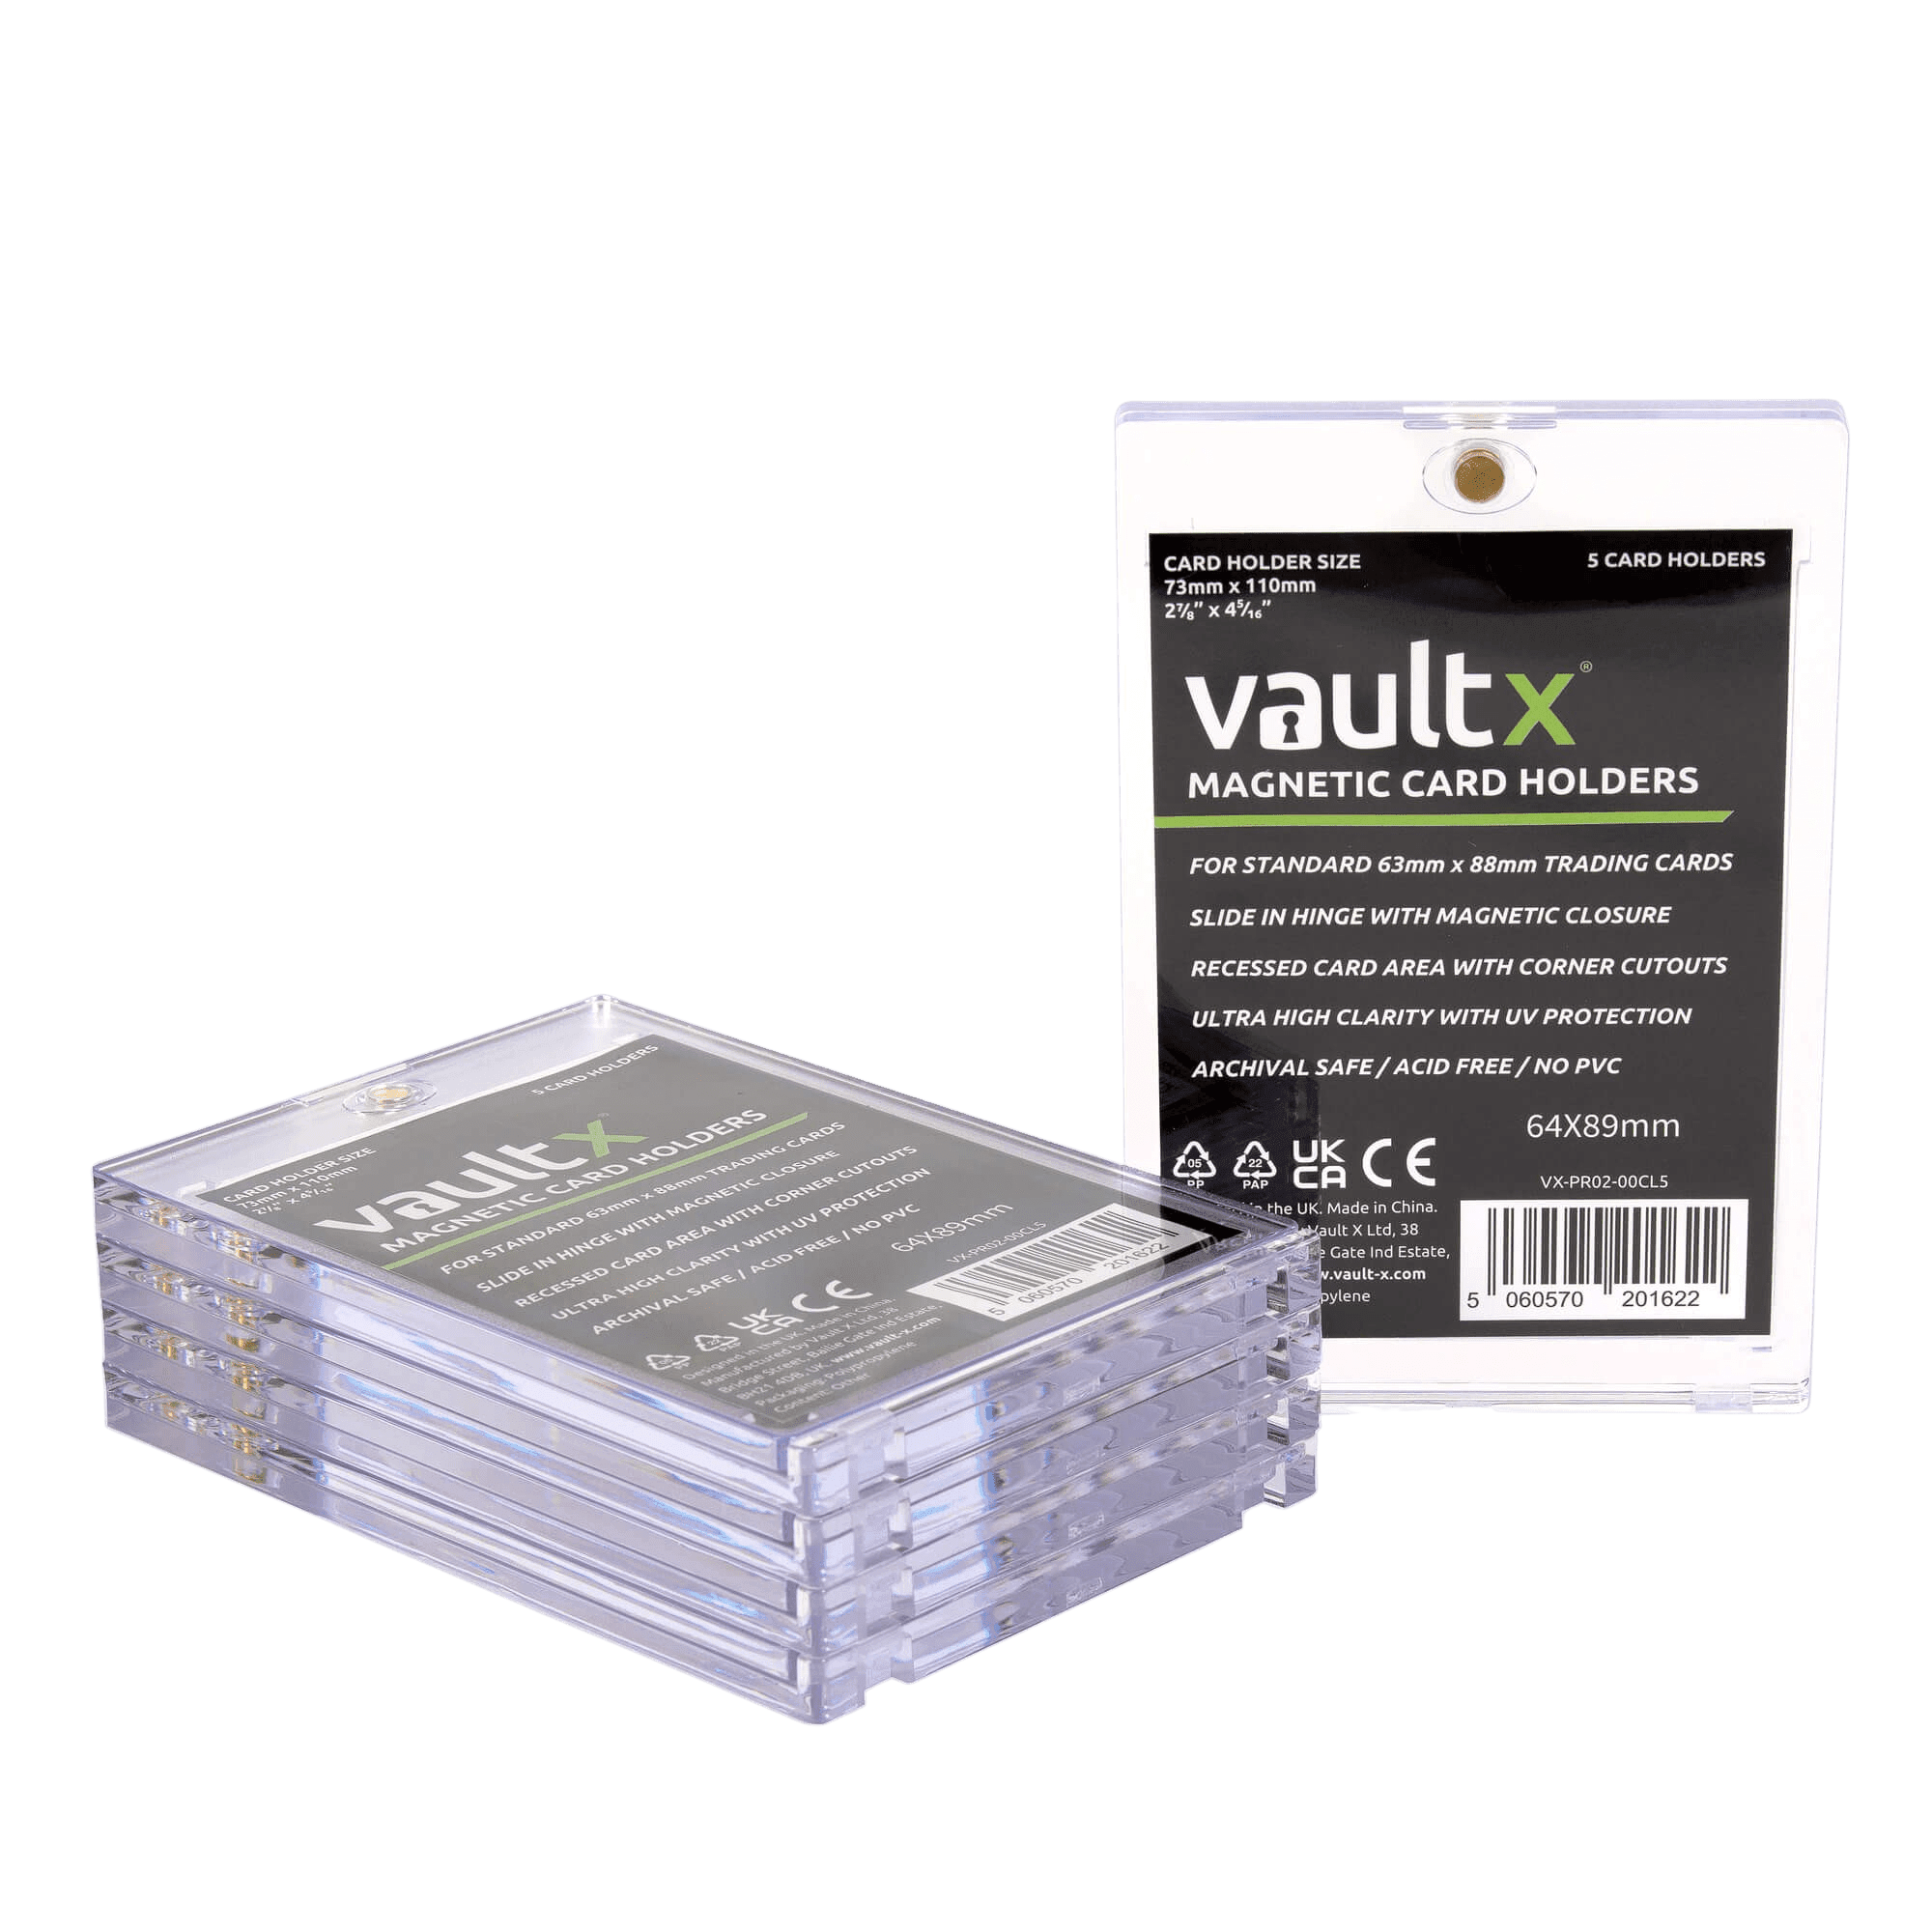 Vault X Magnetic Card Holders 35pt (5 Pack) - The Card Vault